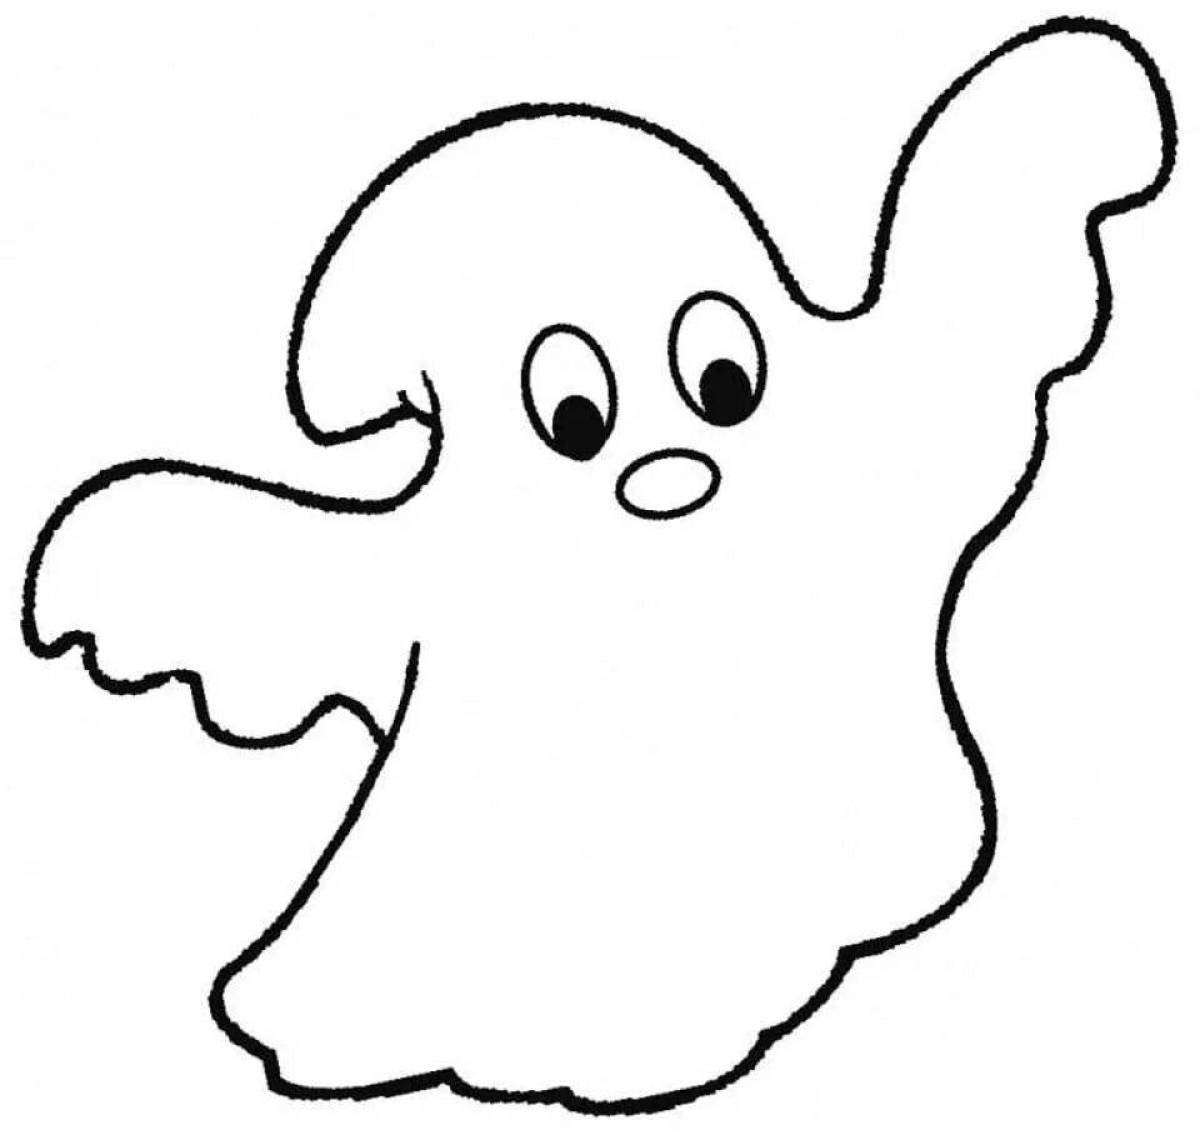 Fancy coloring ghost